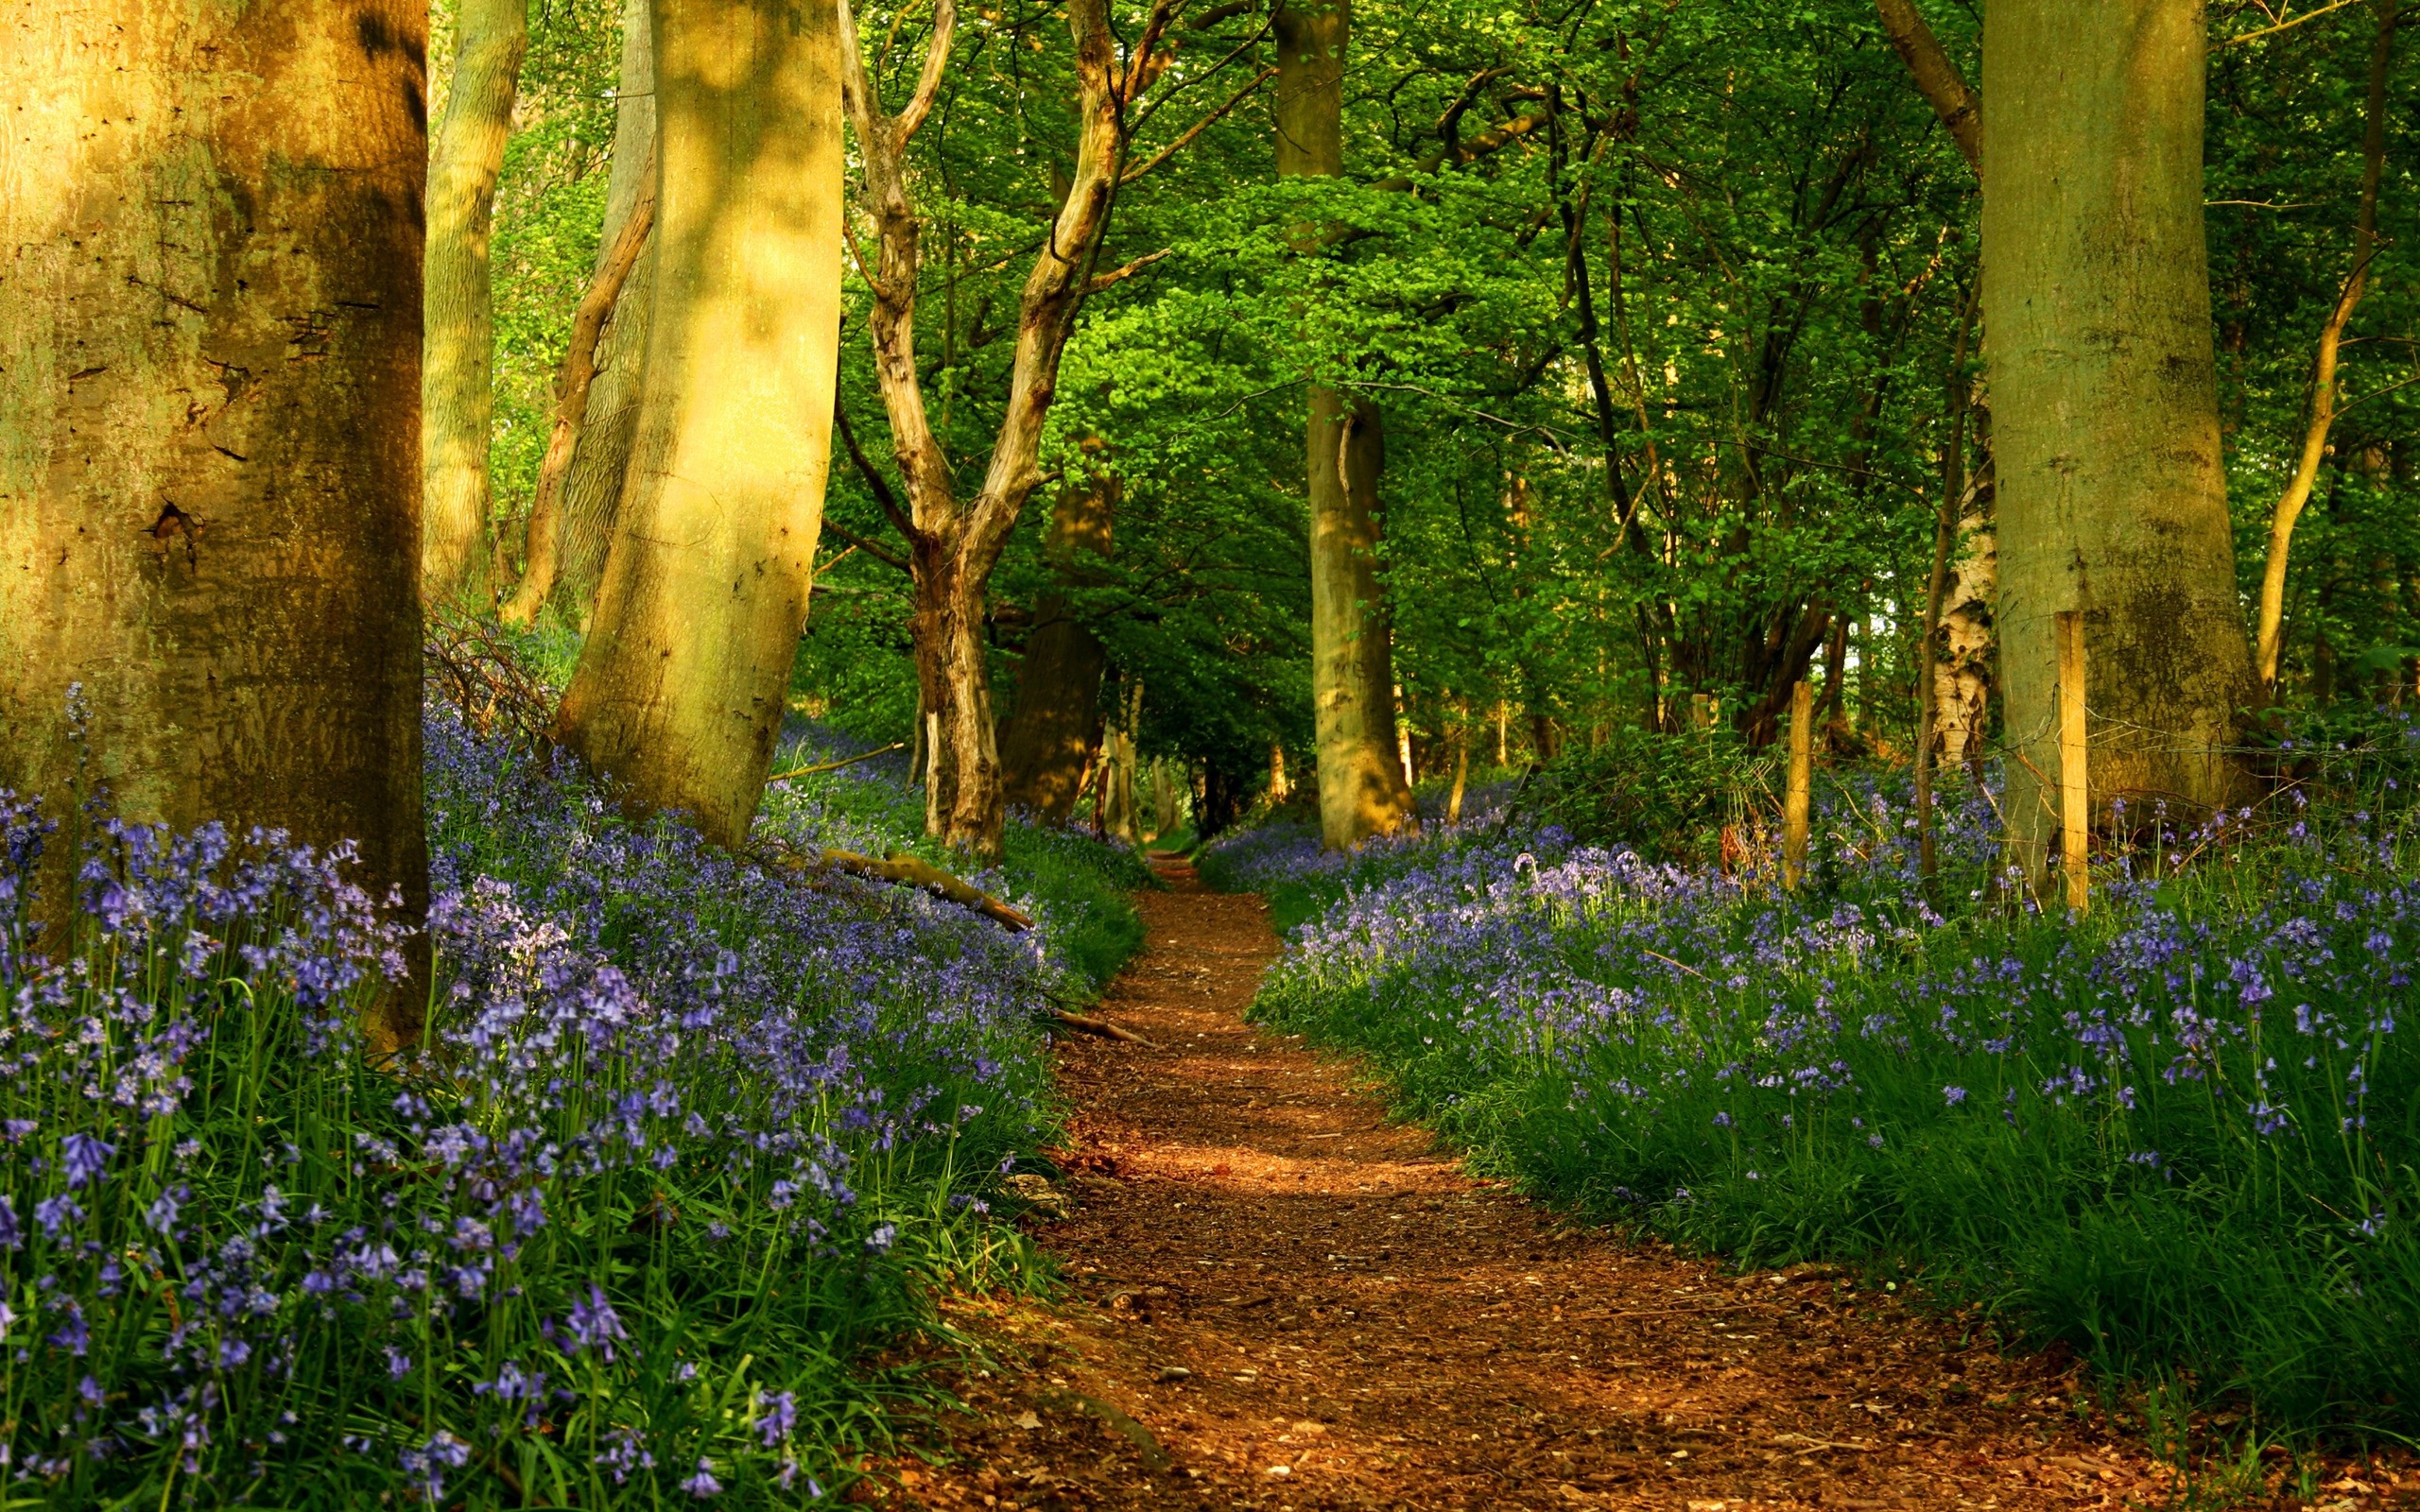  Spring Forest Wallpaper Download Wallpaper with 2560x1600 Resolution 2560x1600